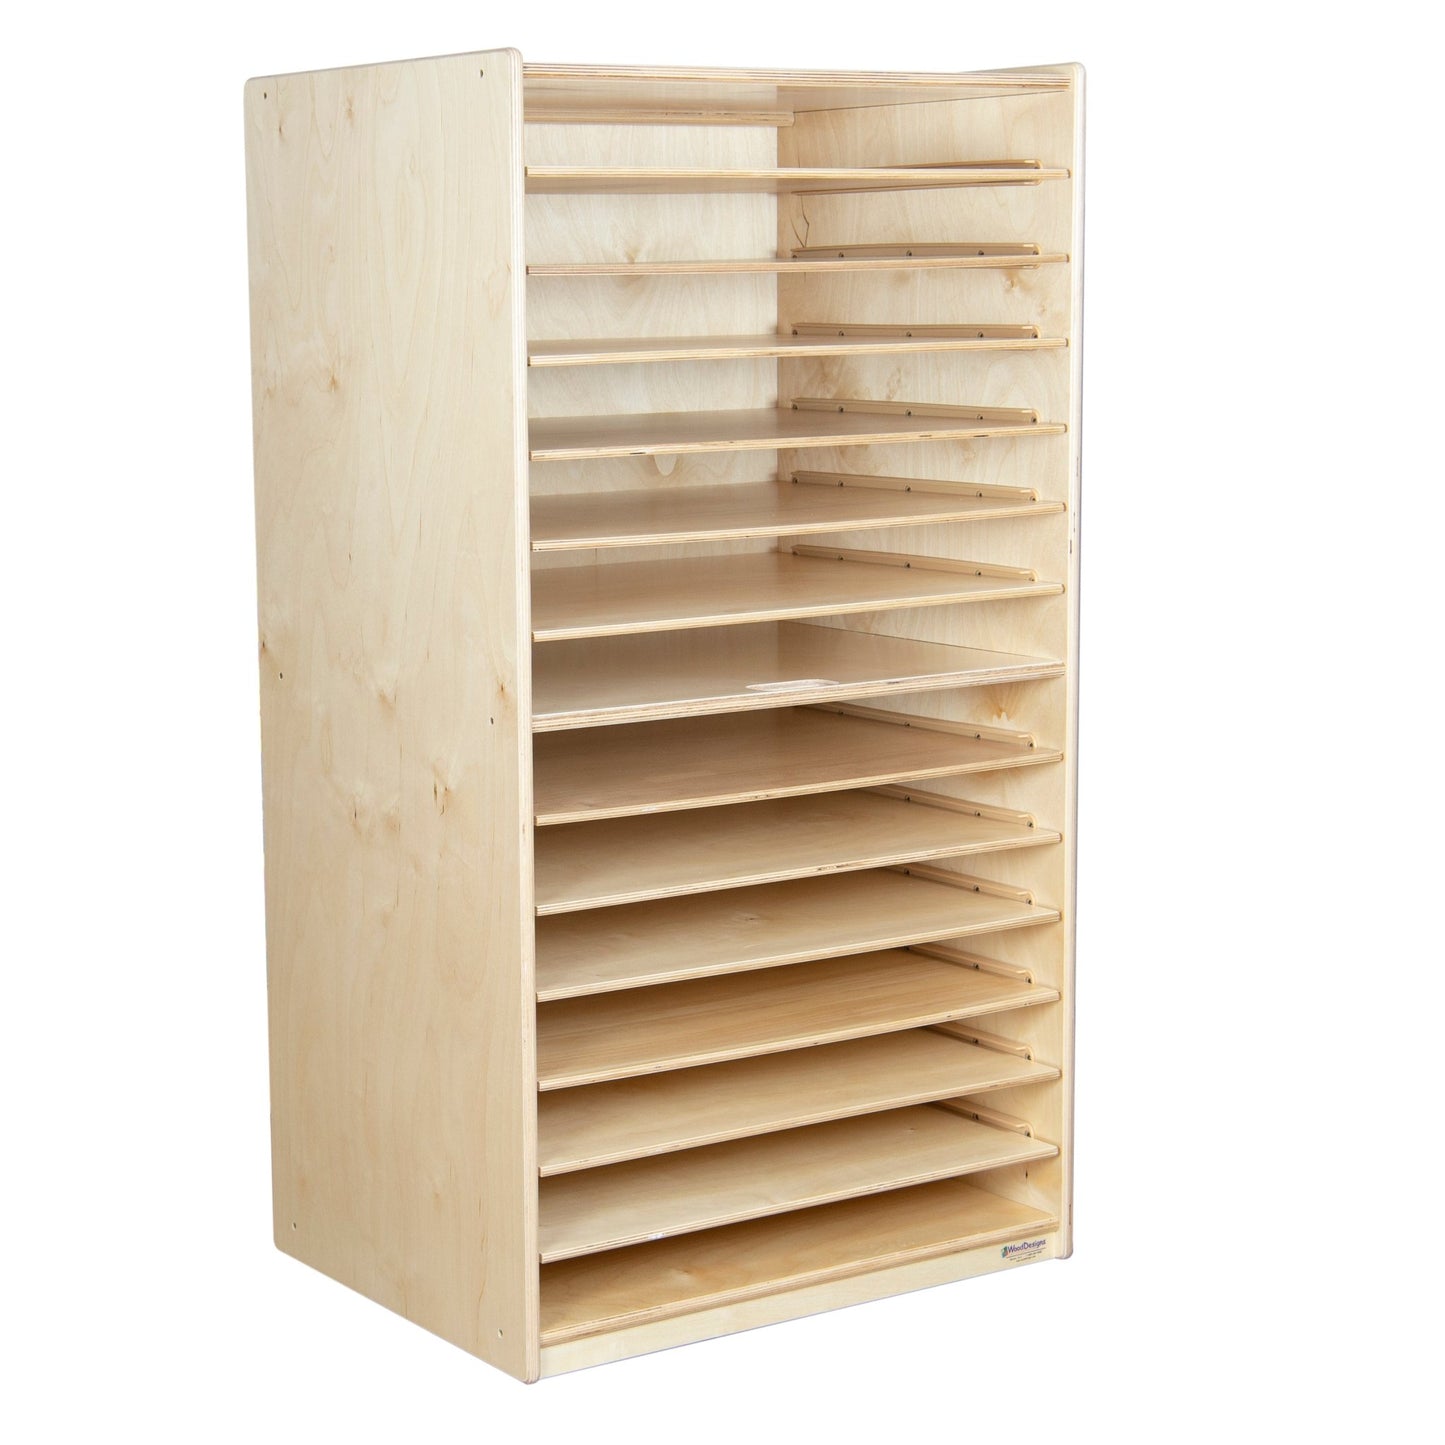 Wood Designs Puzzle and Paper Storage Center (WD33500) - SchoolOutlet